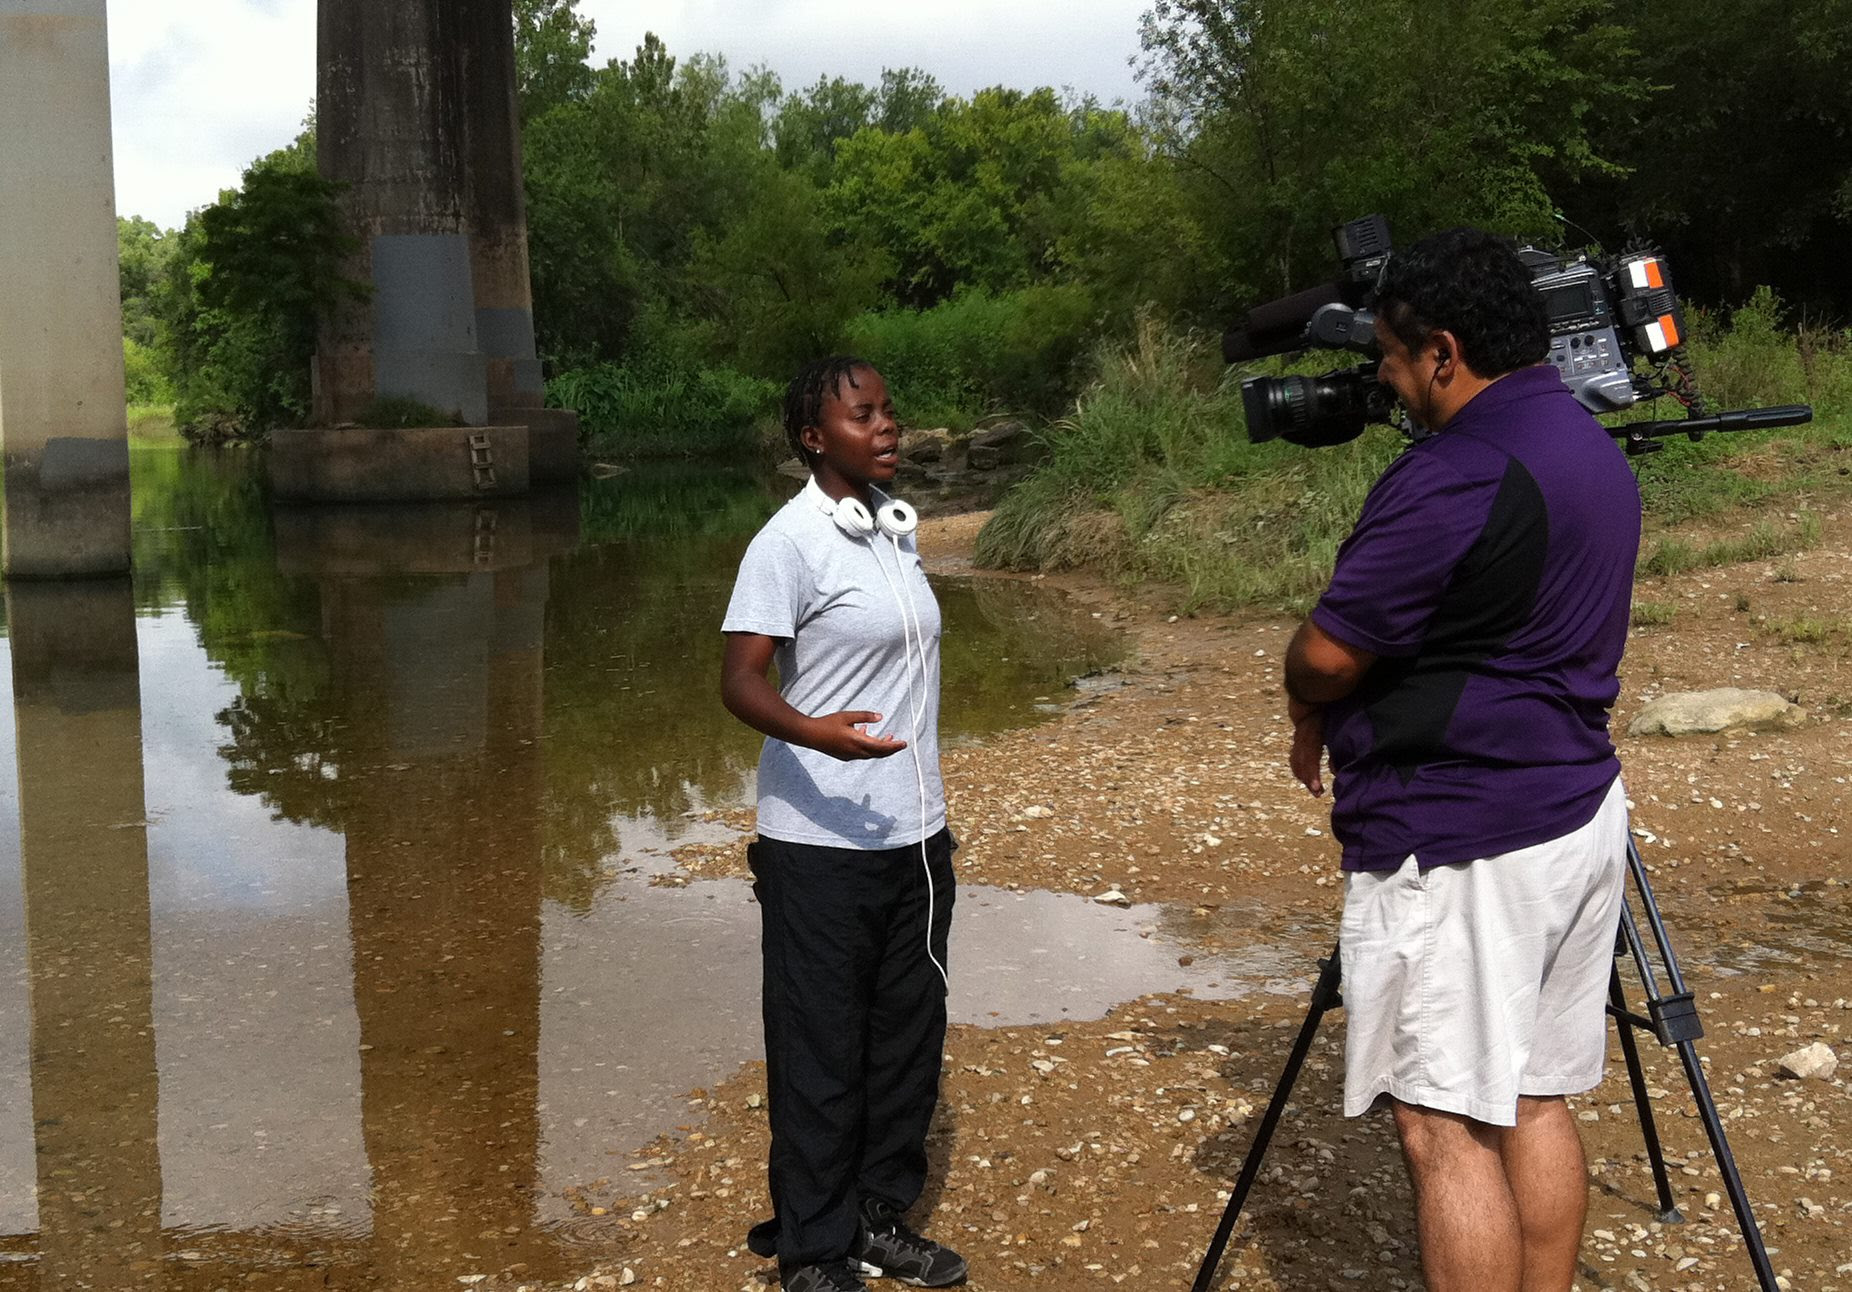 Austin Youth River Watch is hosting a public forum about teens and the environment.